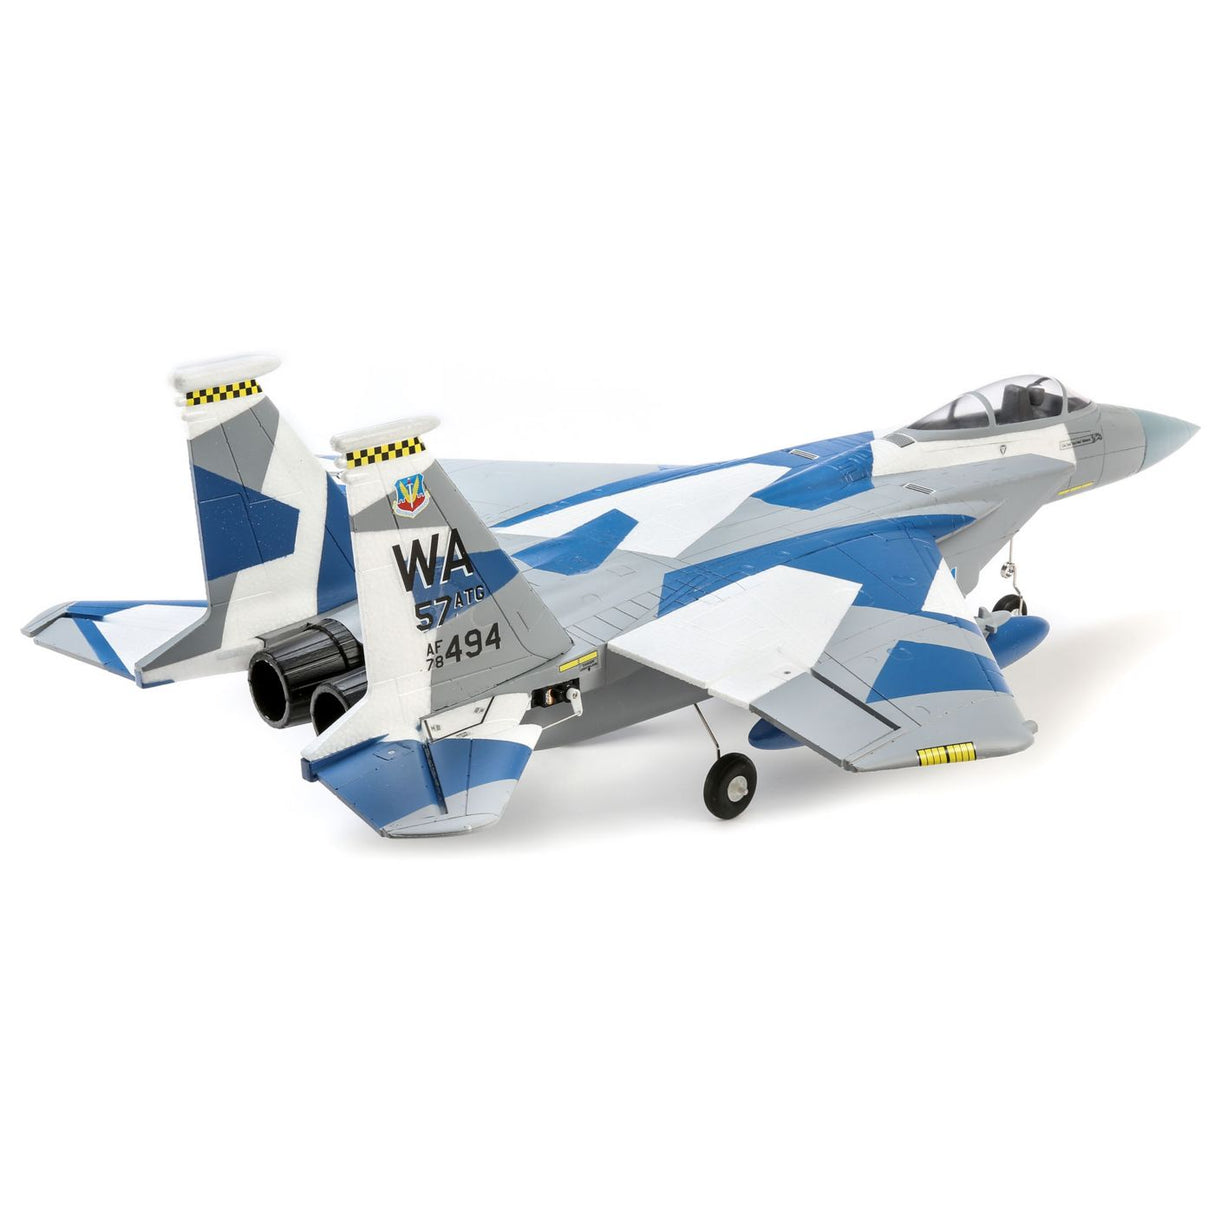 E-Flite EFL97500 F-15 Eagle 64mm EDF BNF Basic Electric Ducted Fan Jet E-Flite RC PLANES